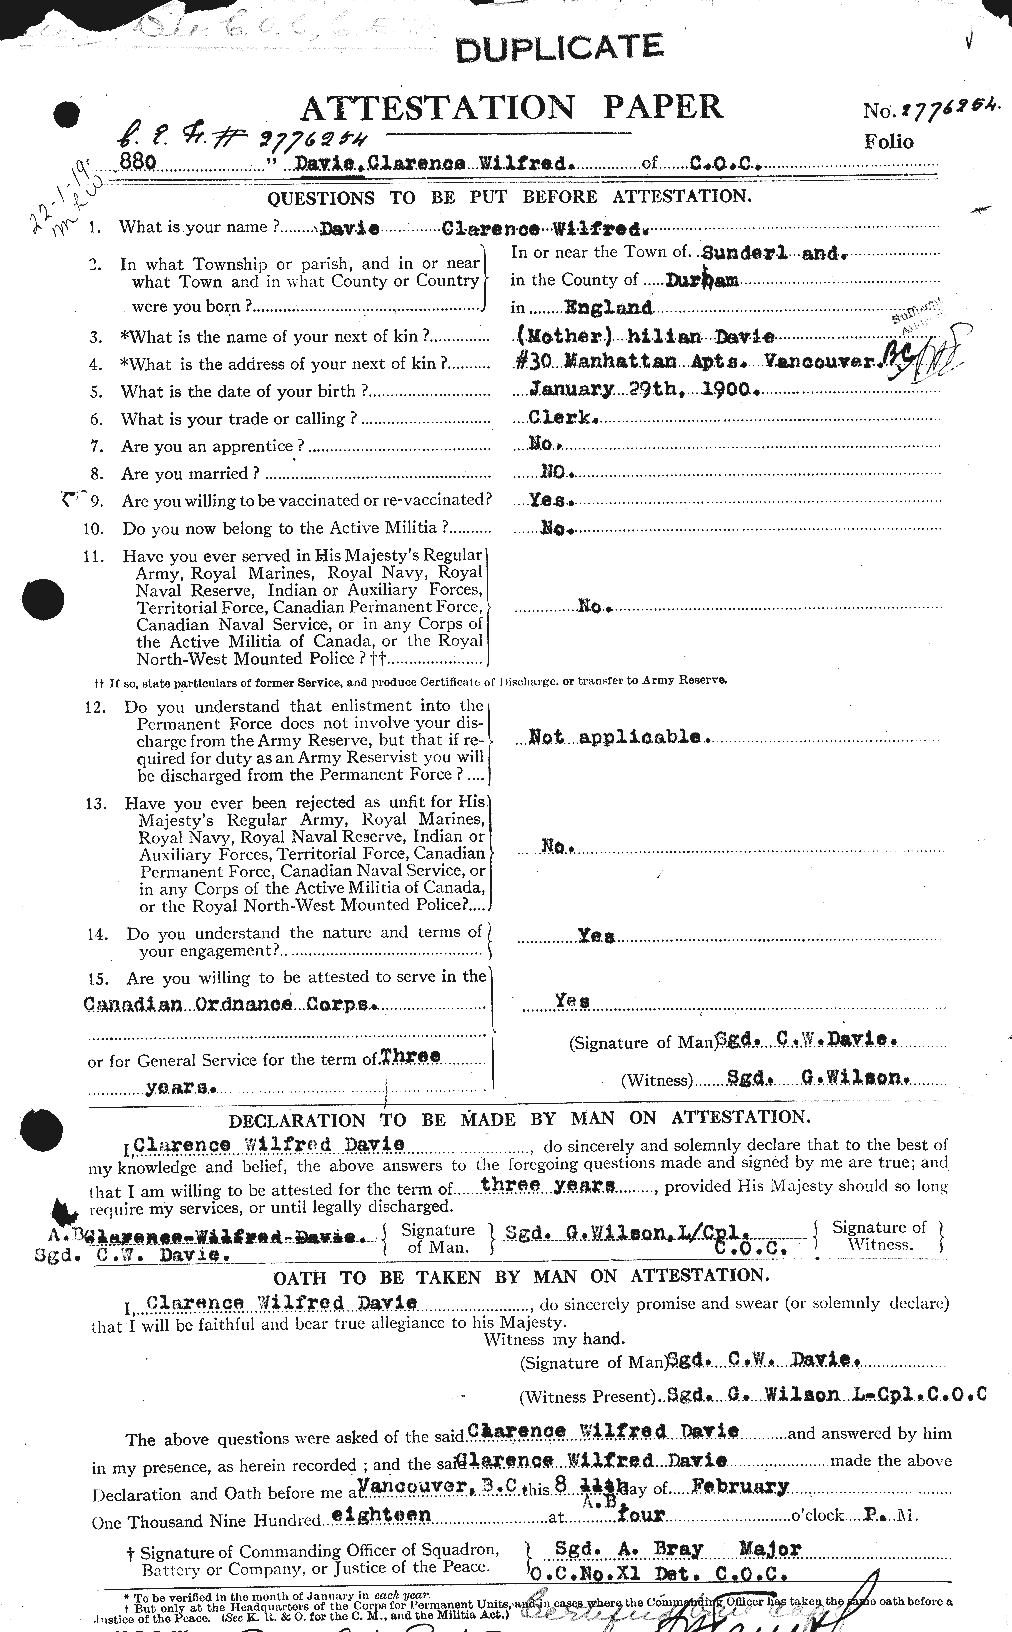 Personnel Records of the First World War - CEF 278817a